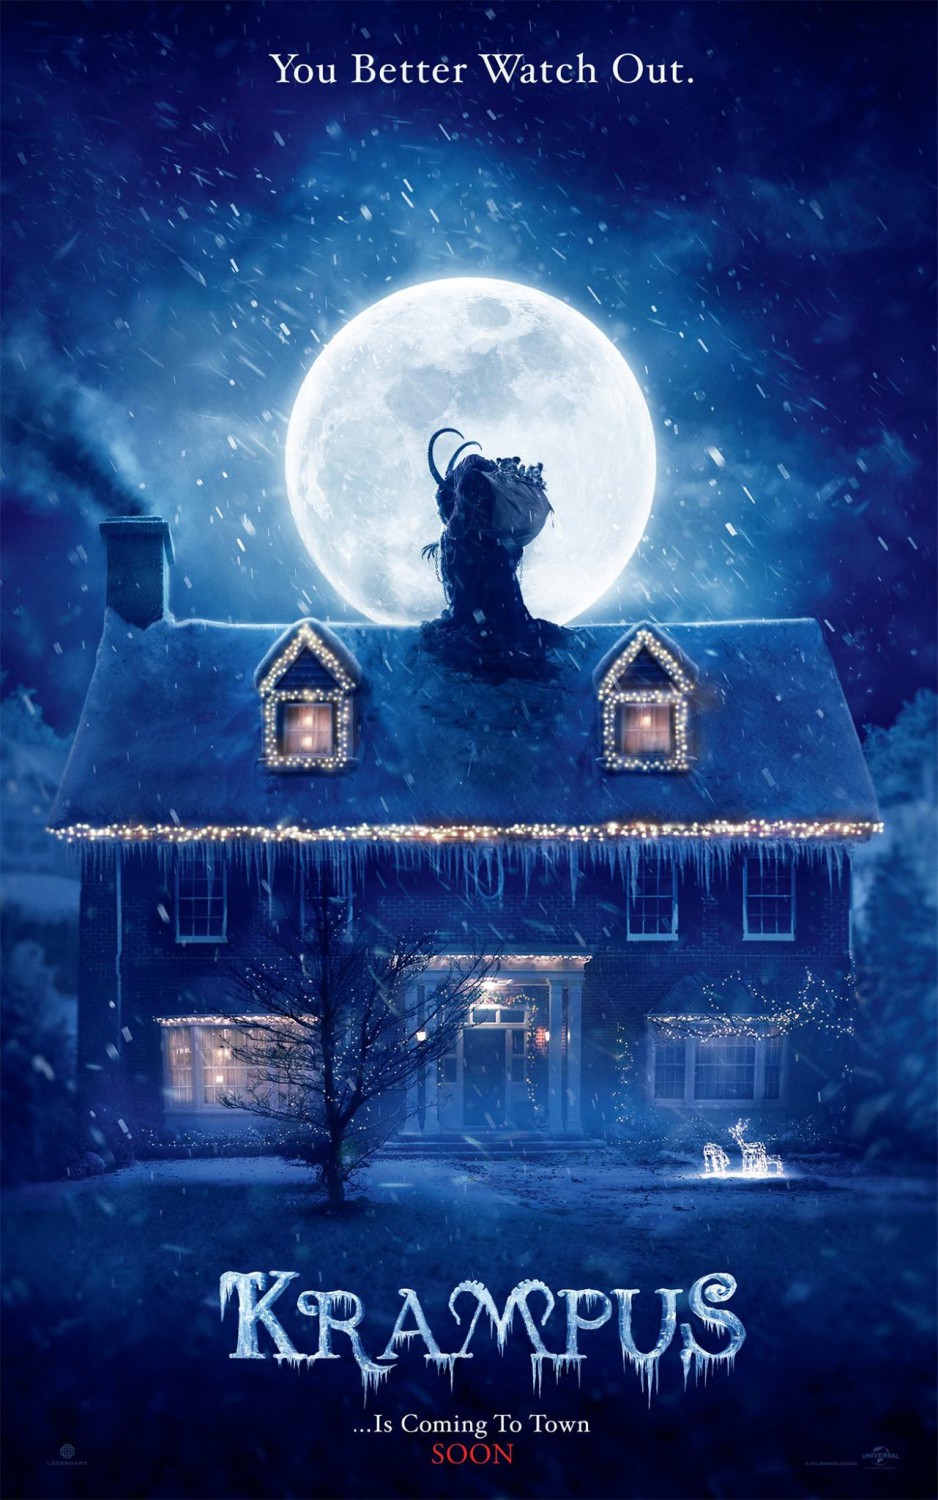 Krampus film review: bringing the horror to Christmas